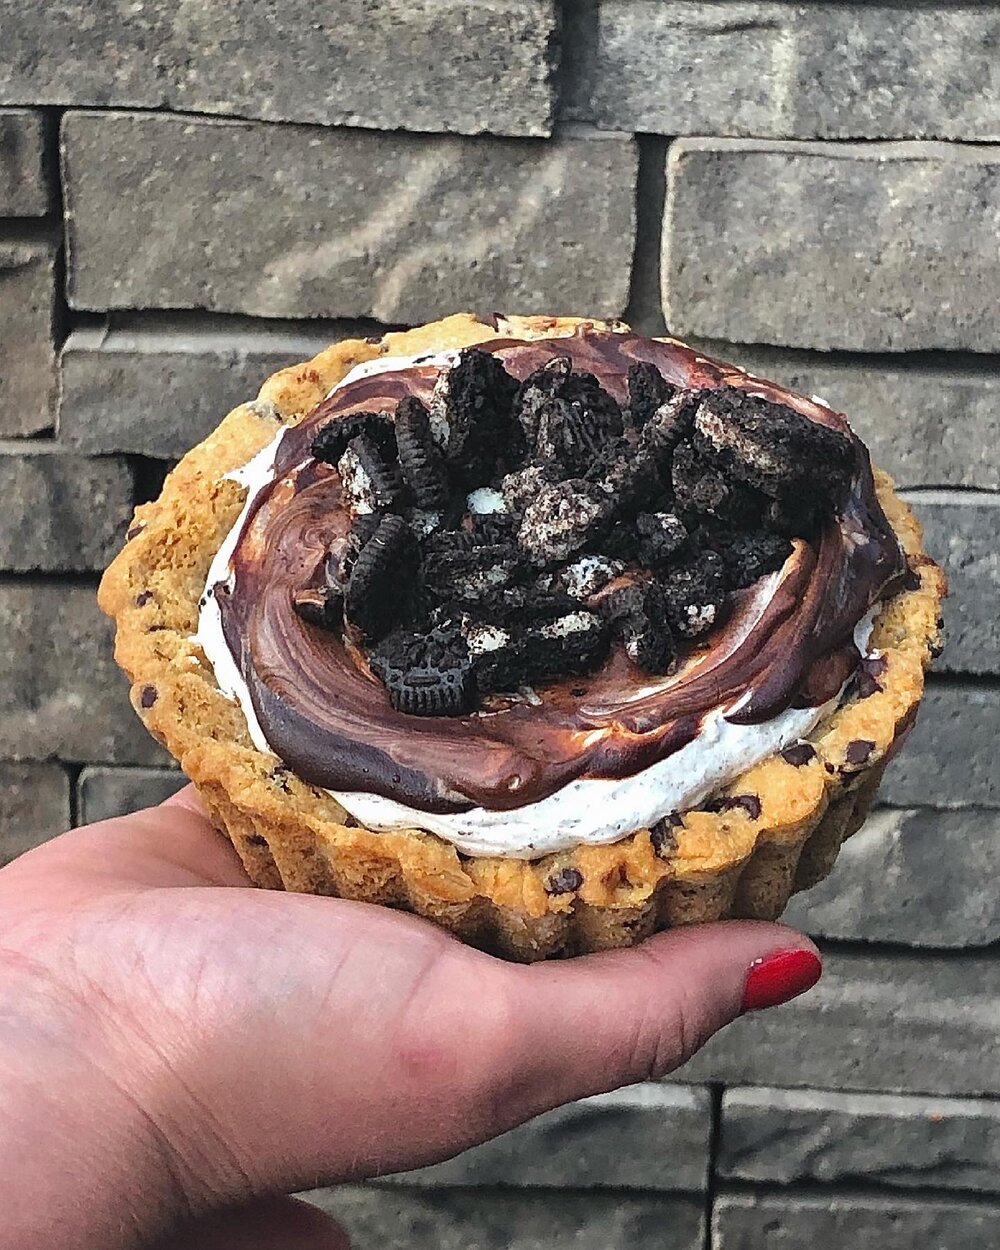 Can you say Cookie Monster Tart? This was the size of my head and it was so good! ⁣Chocolate chip cookie shell with cookies &amp; cream filled inside. 👌🏻
⁣⁣
⁣This new bakery find led to me some tasty treats. The s&rsquo;mores bar and trash blondie 